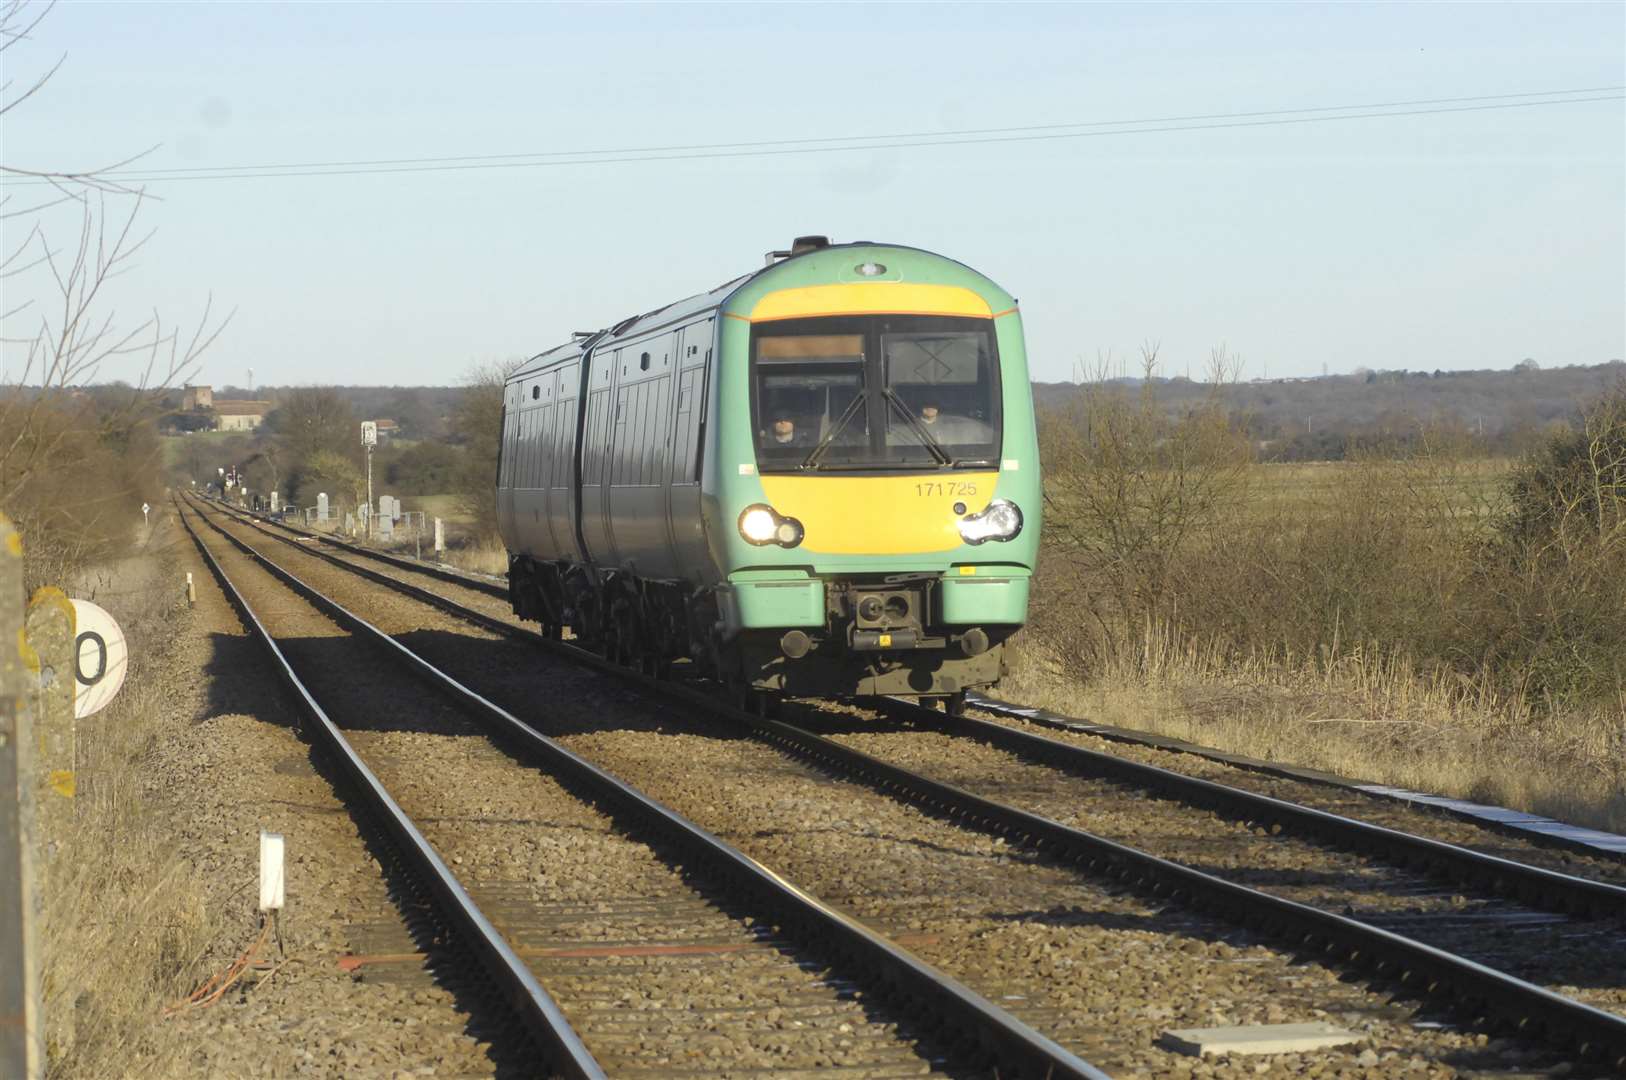 Southern services have been affected between Hastings and Ashford